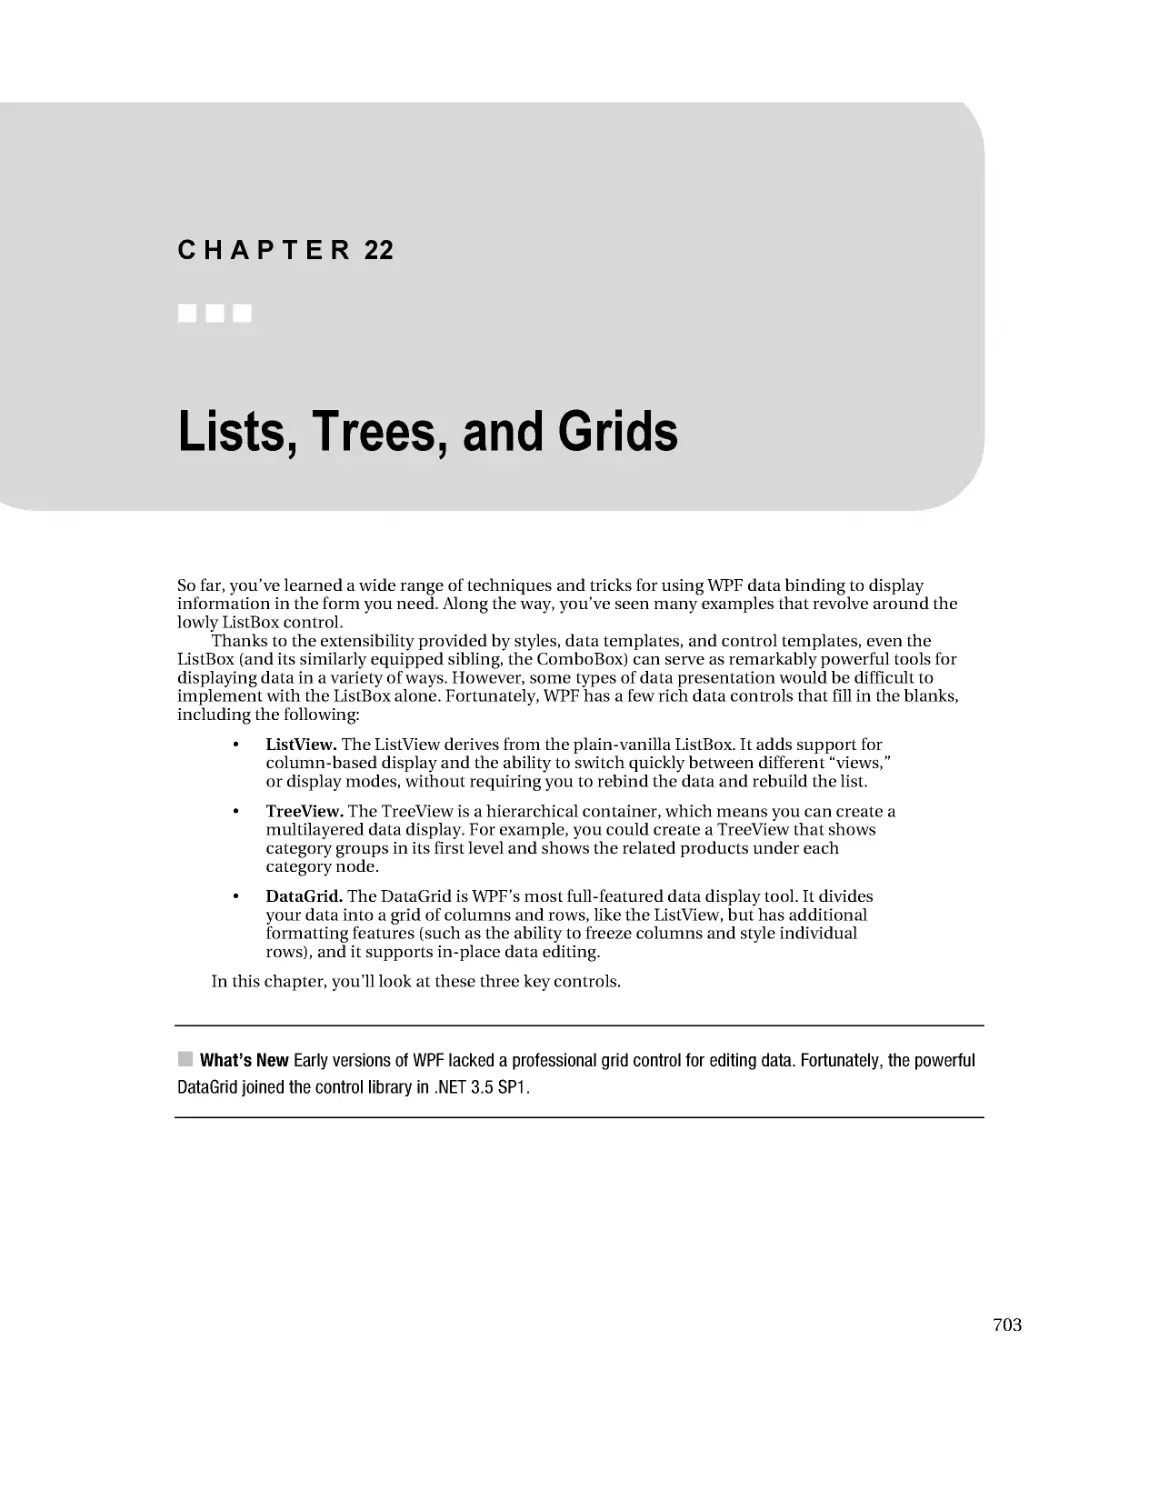 Lists, Trees, and Grids